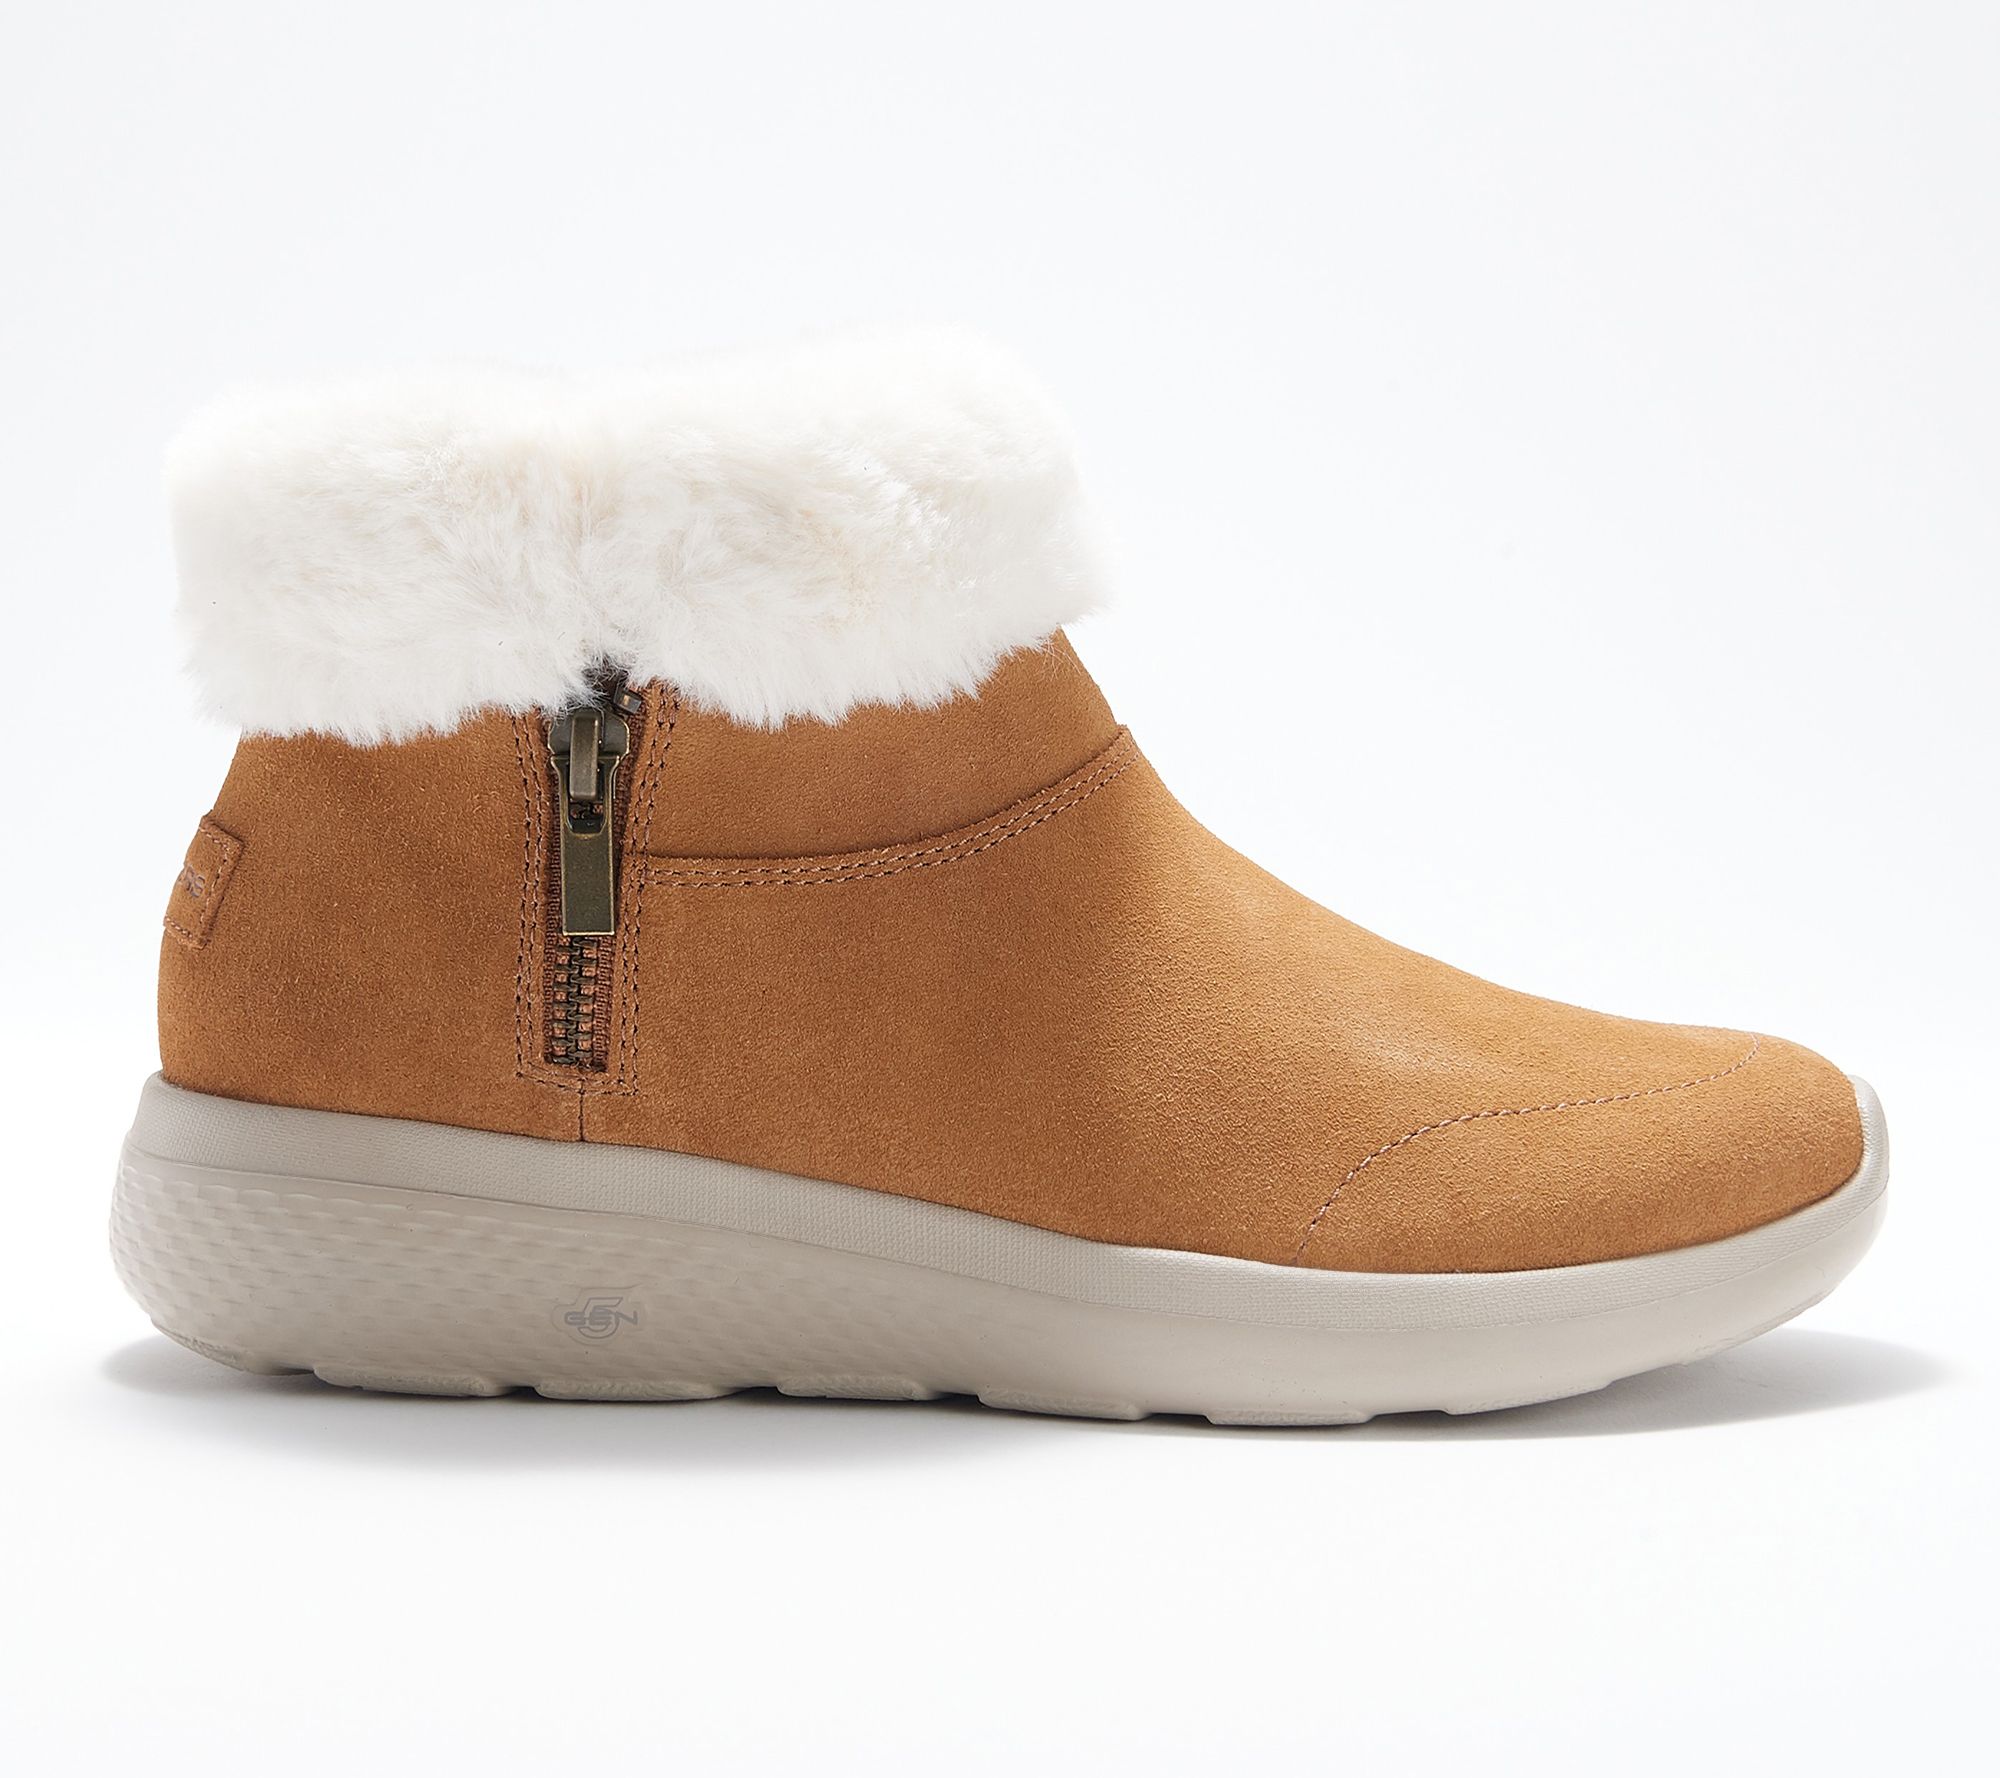 skechers fur lined boots